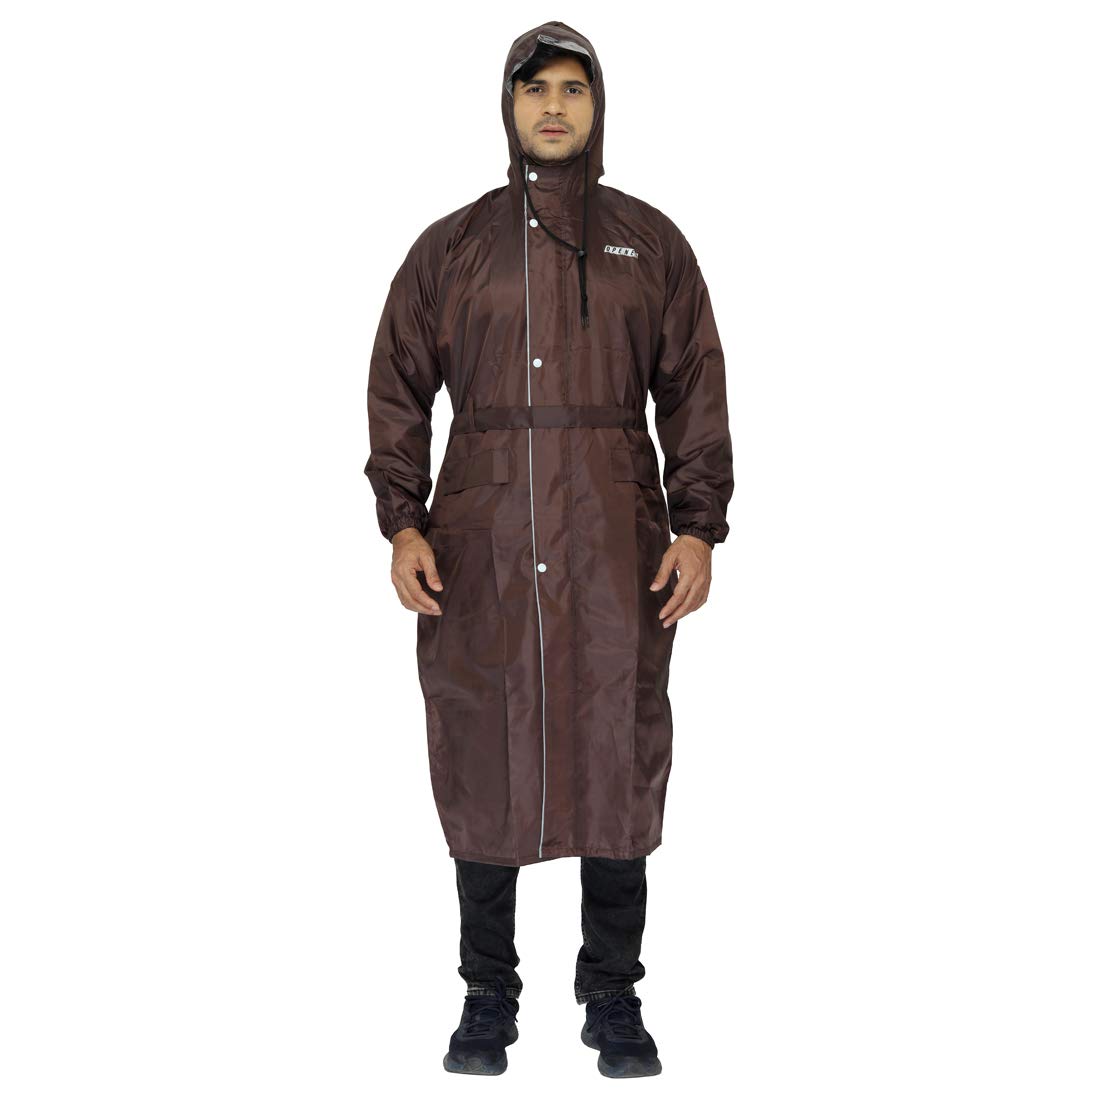 THE CLOWNFISH by STRAUSS Polyester Reversible Use Unisex Waterproof Long Coat Raincoat For Men And Women With Adjustable Hood And Reflector At Back For Night Visibility Opener Series (Brown-Free Size)